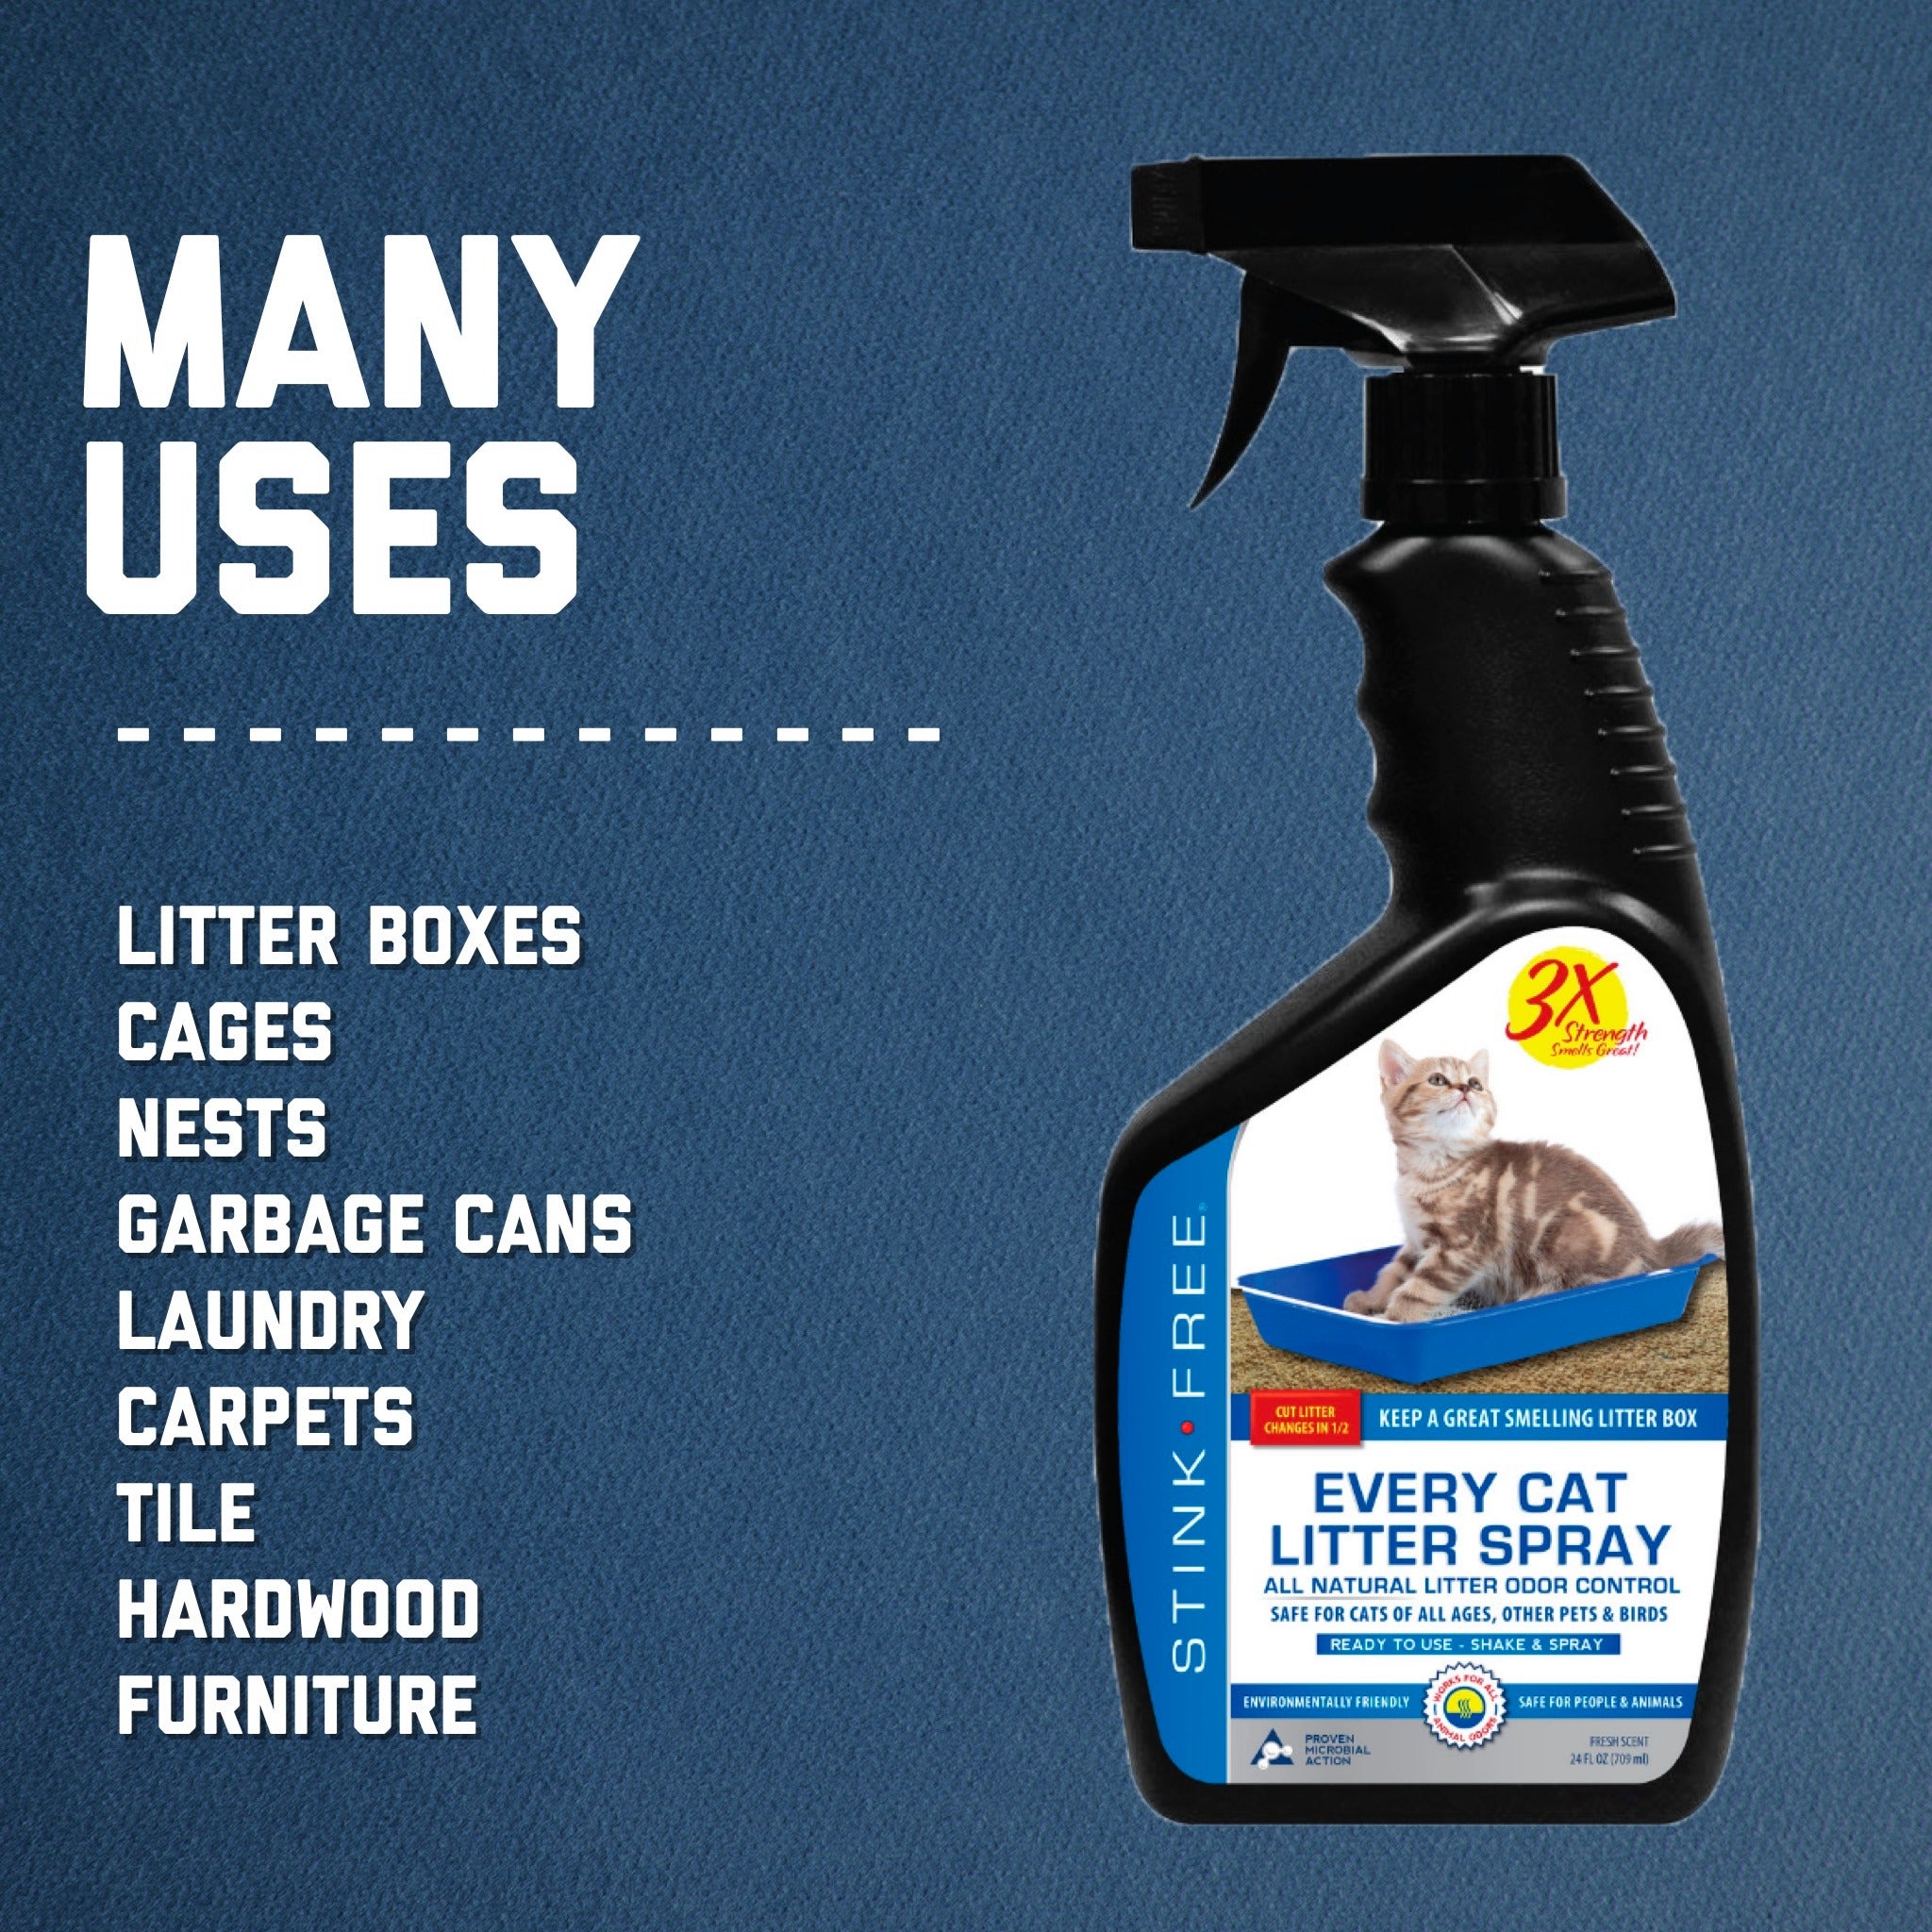 Every Cat Litter Spray - Urine Enzyme Cat Odor Spray Instantly Eliminate Litter Box Odor & Cut Litter Box Changes in Half!